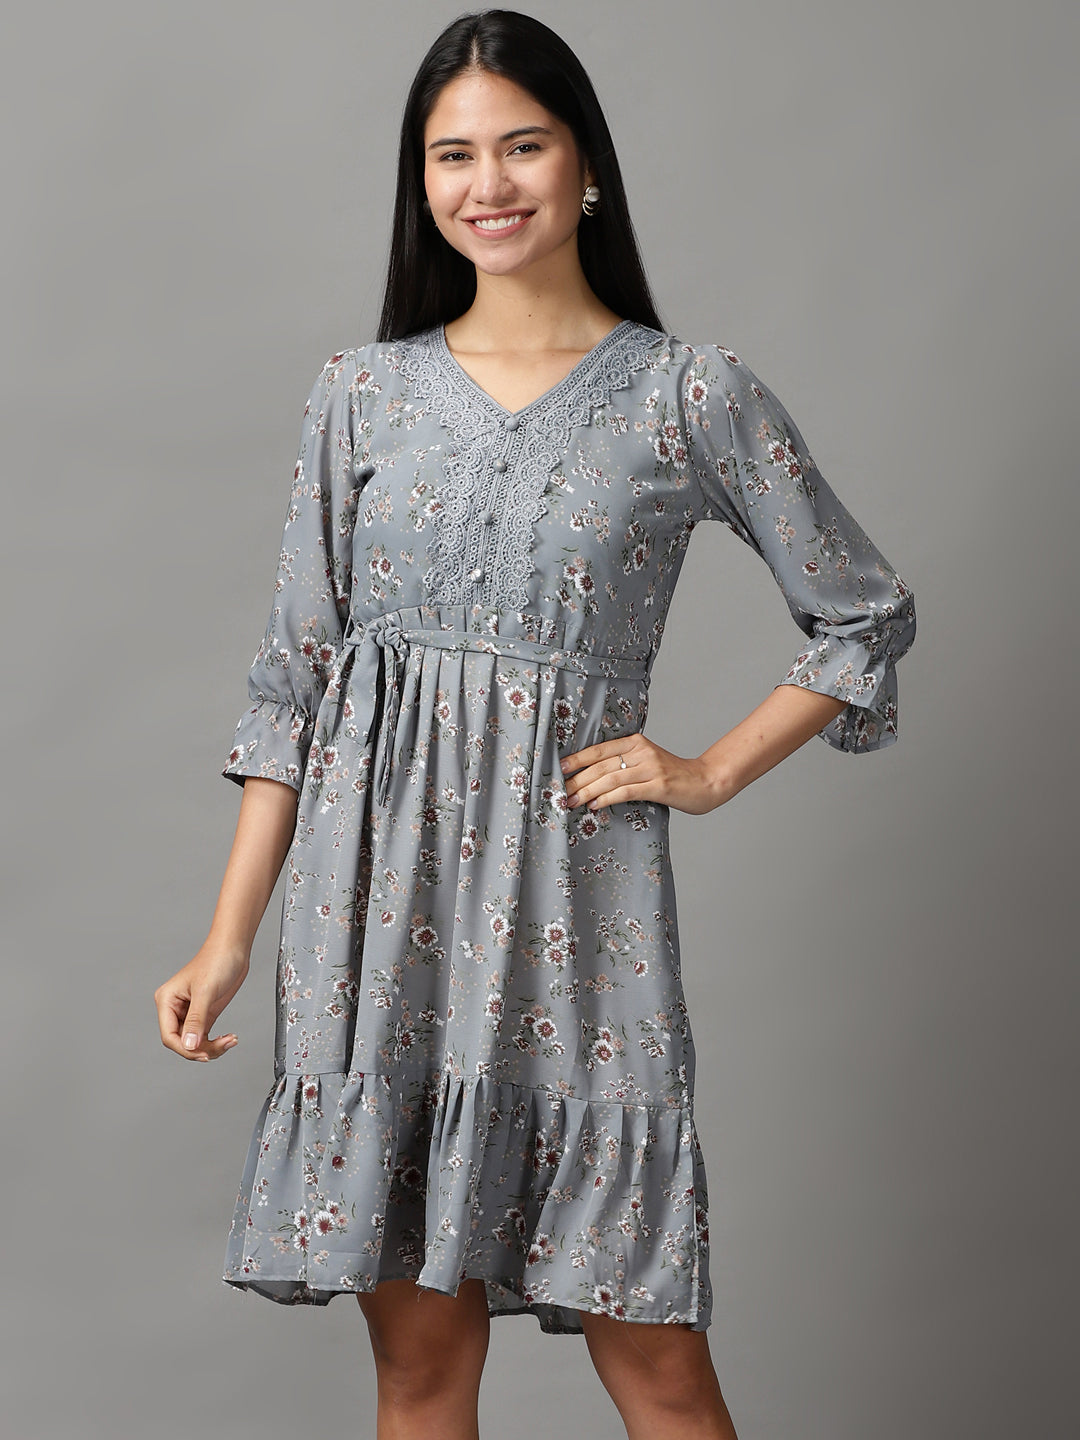 Women's Grey Floral Fit and Flare Dress